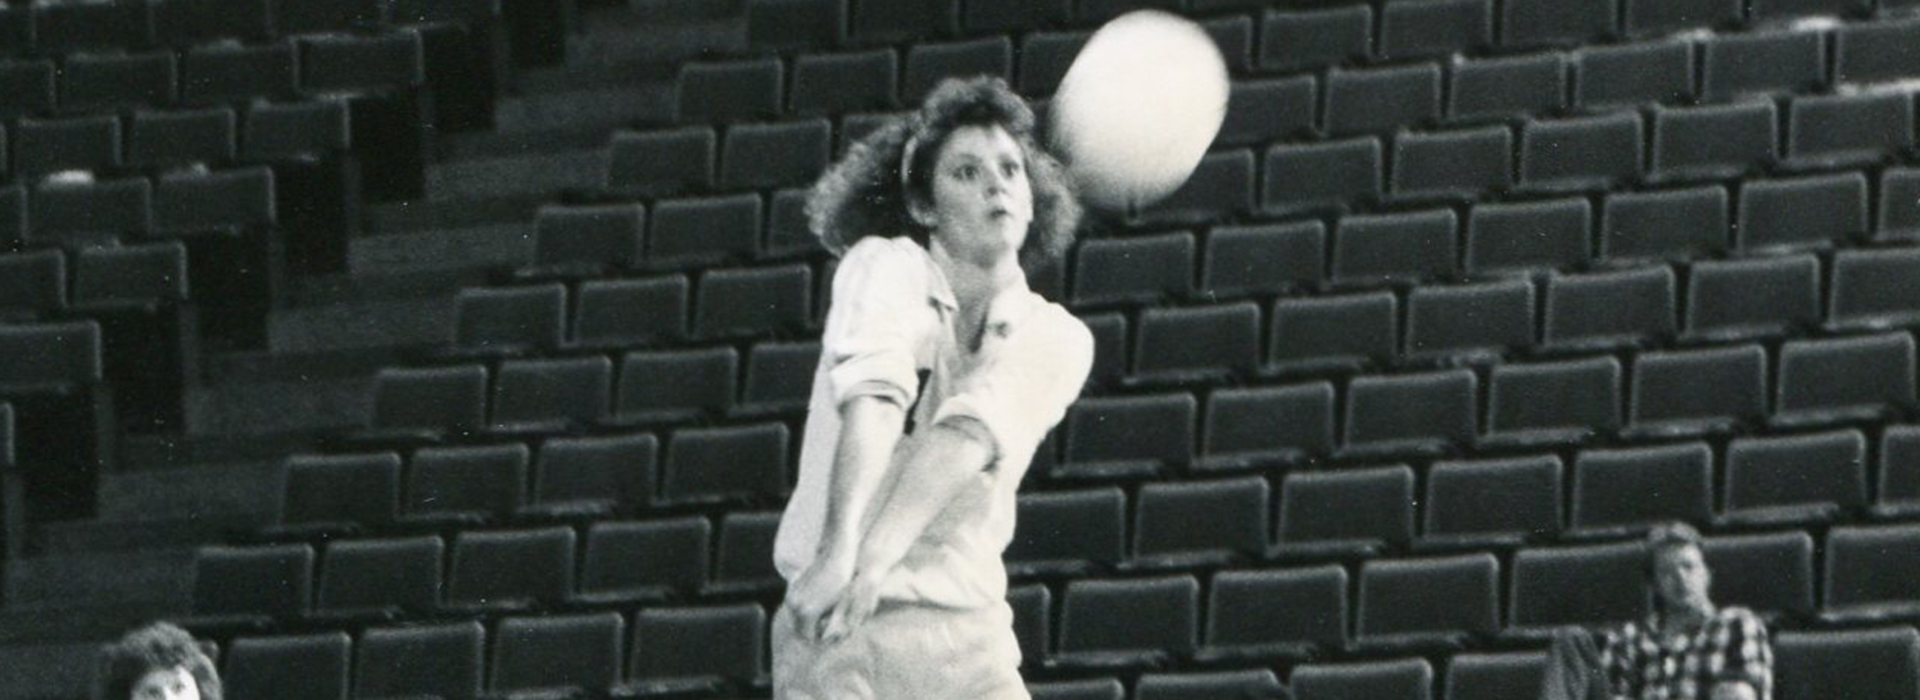 1986 Tech Volleyball to be recognized during Legends Weekend, Oct. 1-2